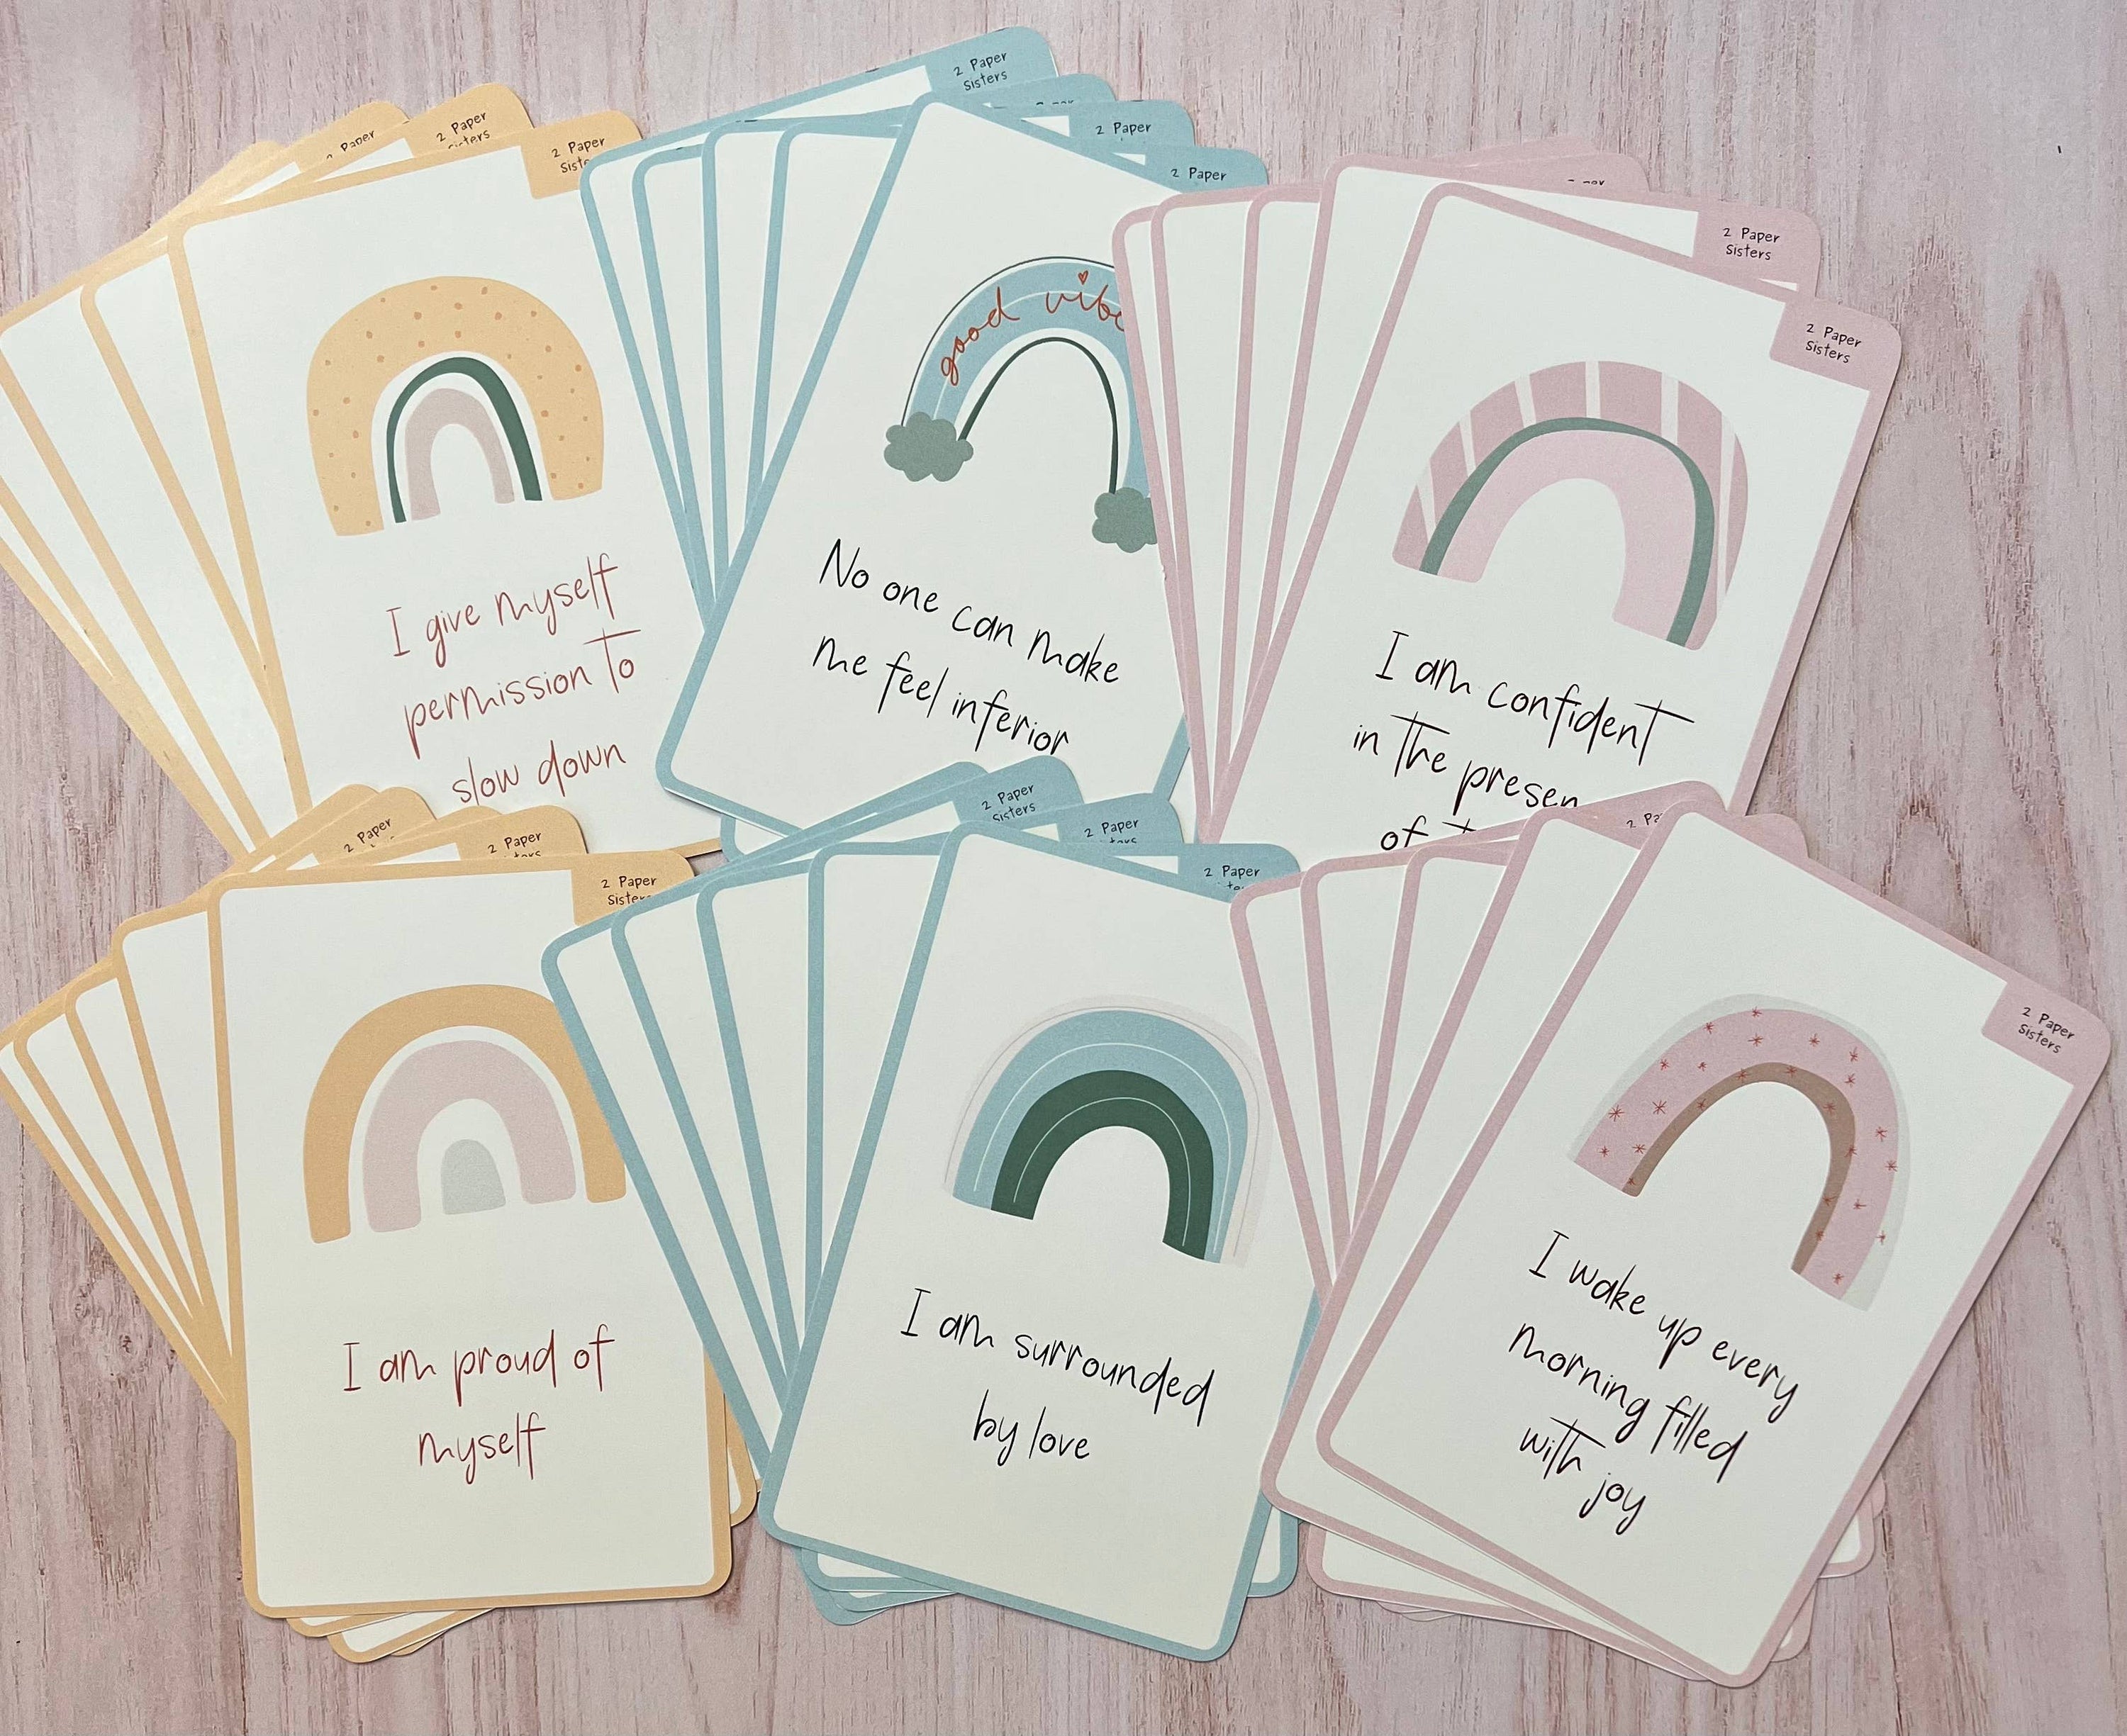 A display of all 30 Positive Affirmation Cards in yellow, blue, and pink.